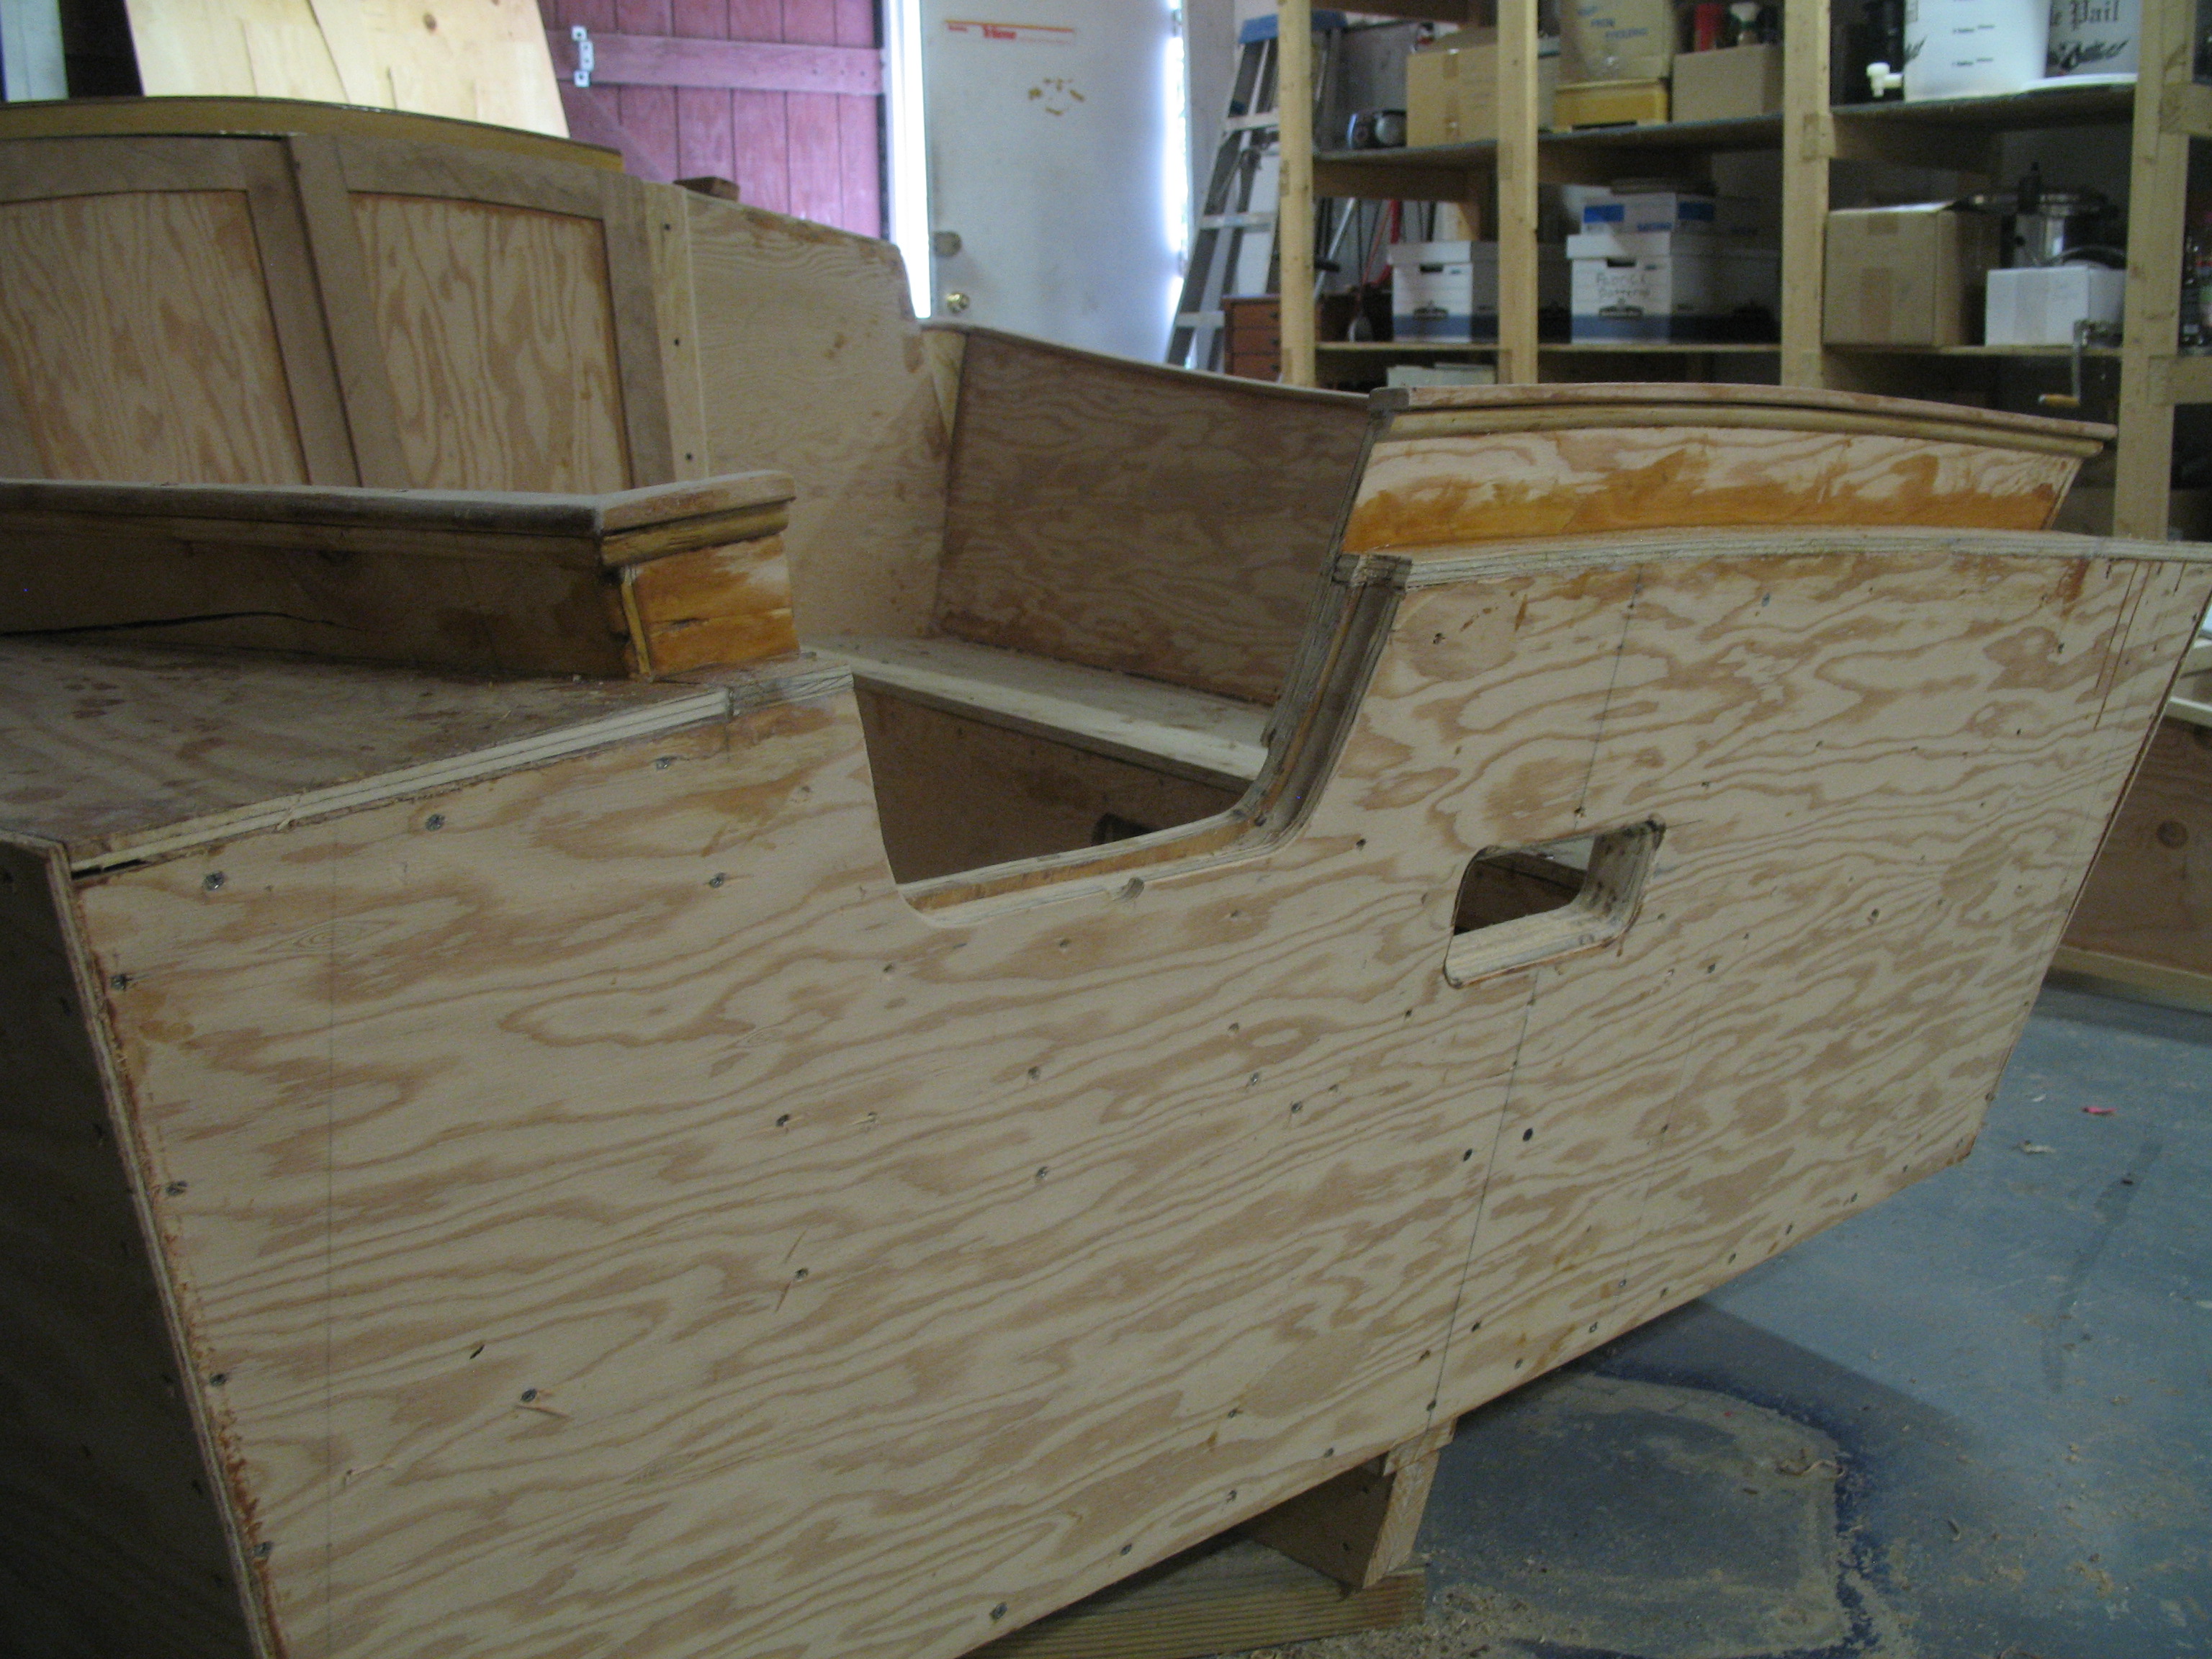 Building a plywood boat video | Coll boat